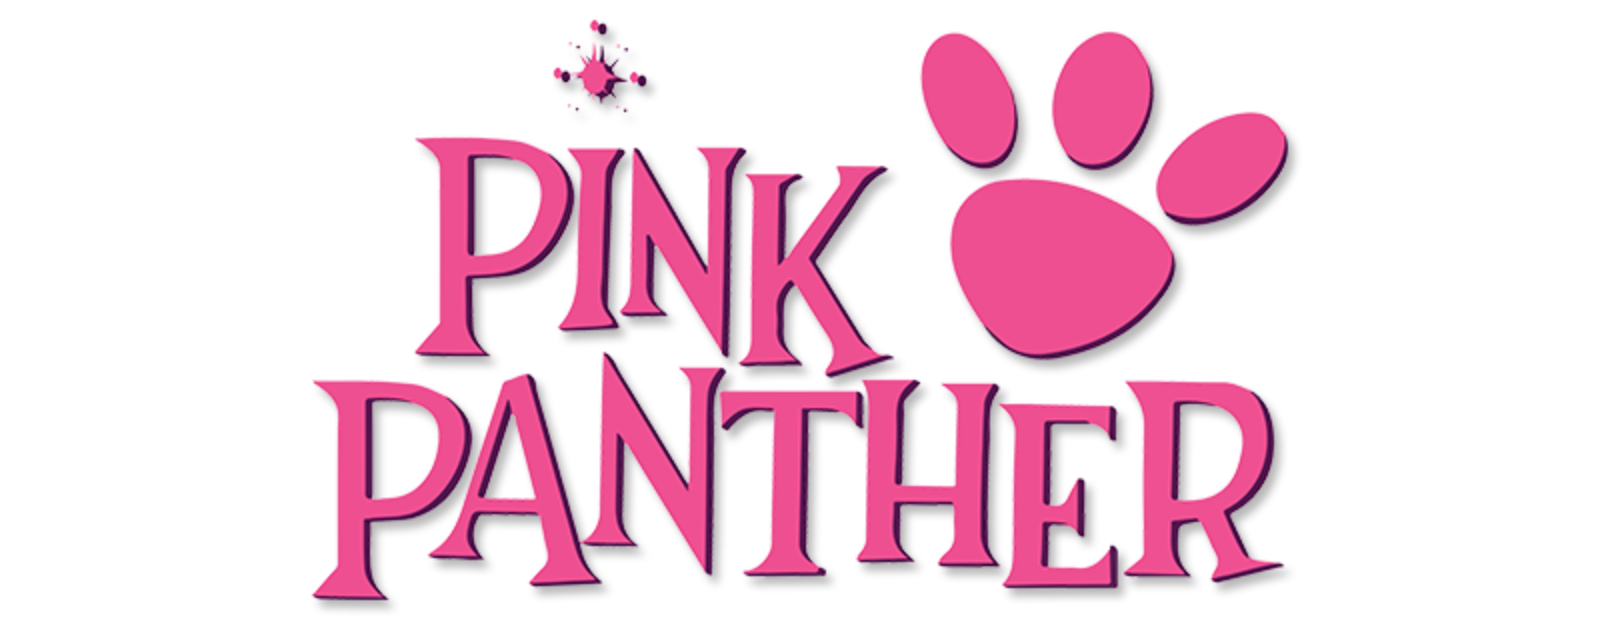 The Pink Panther Complete (4 DVDs Box Set)